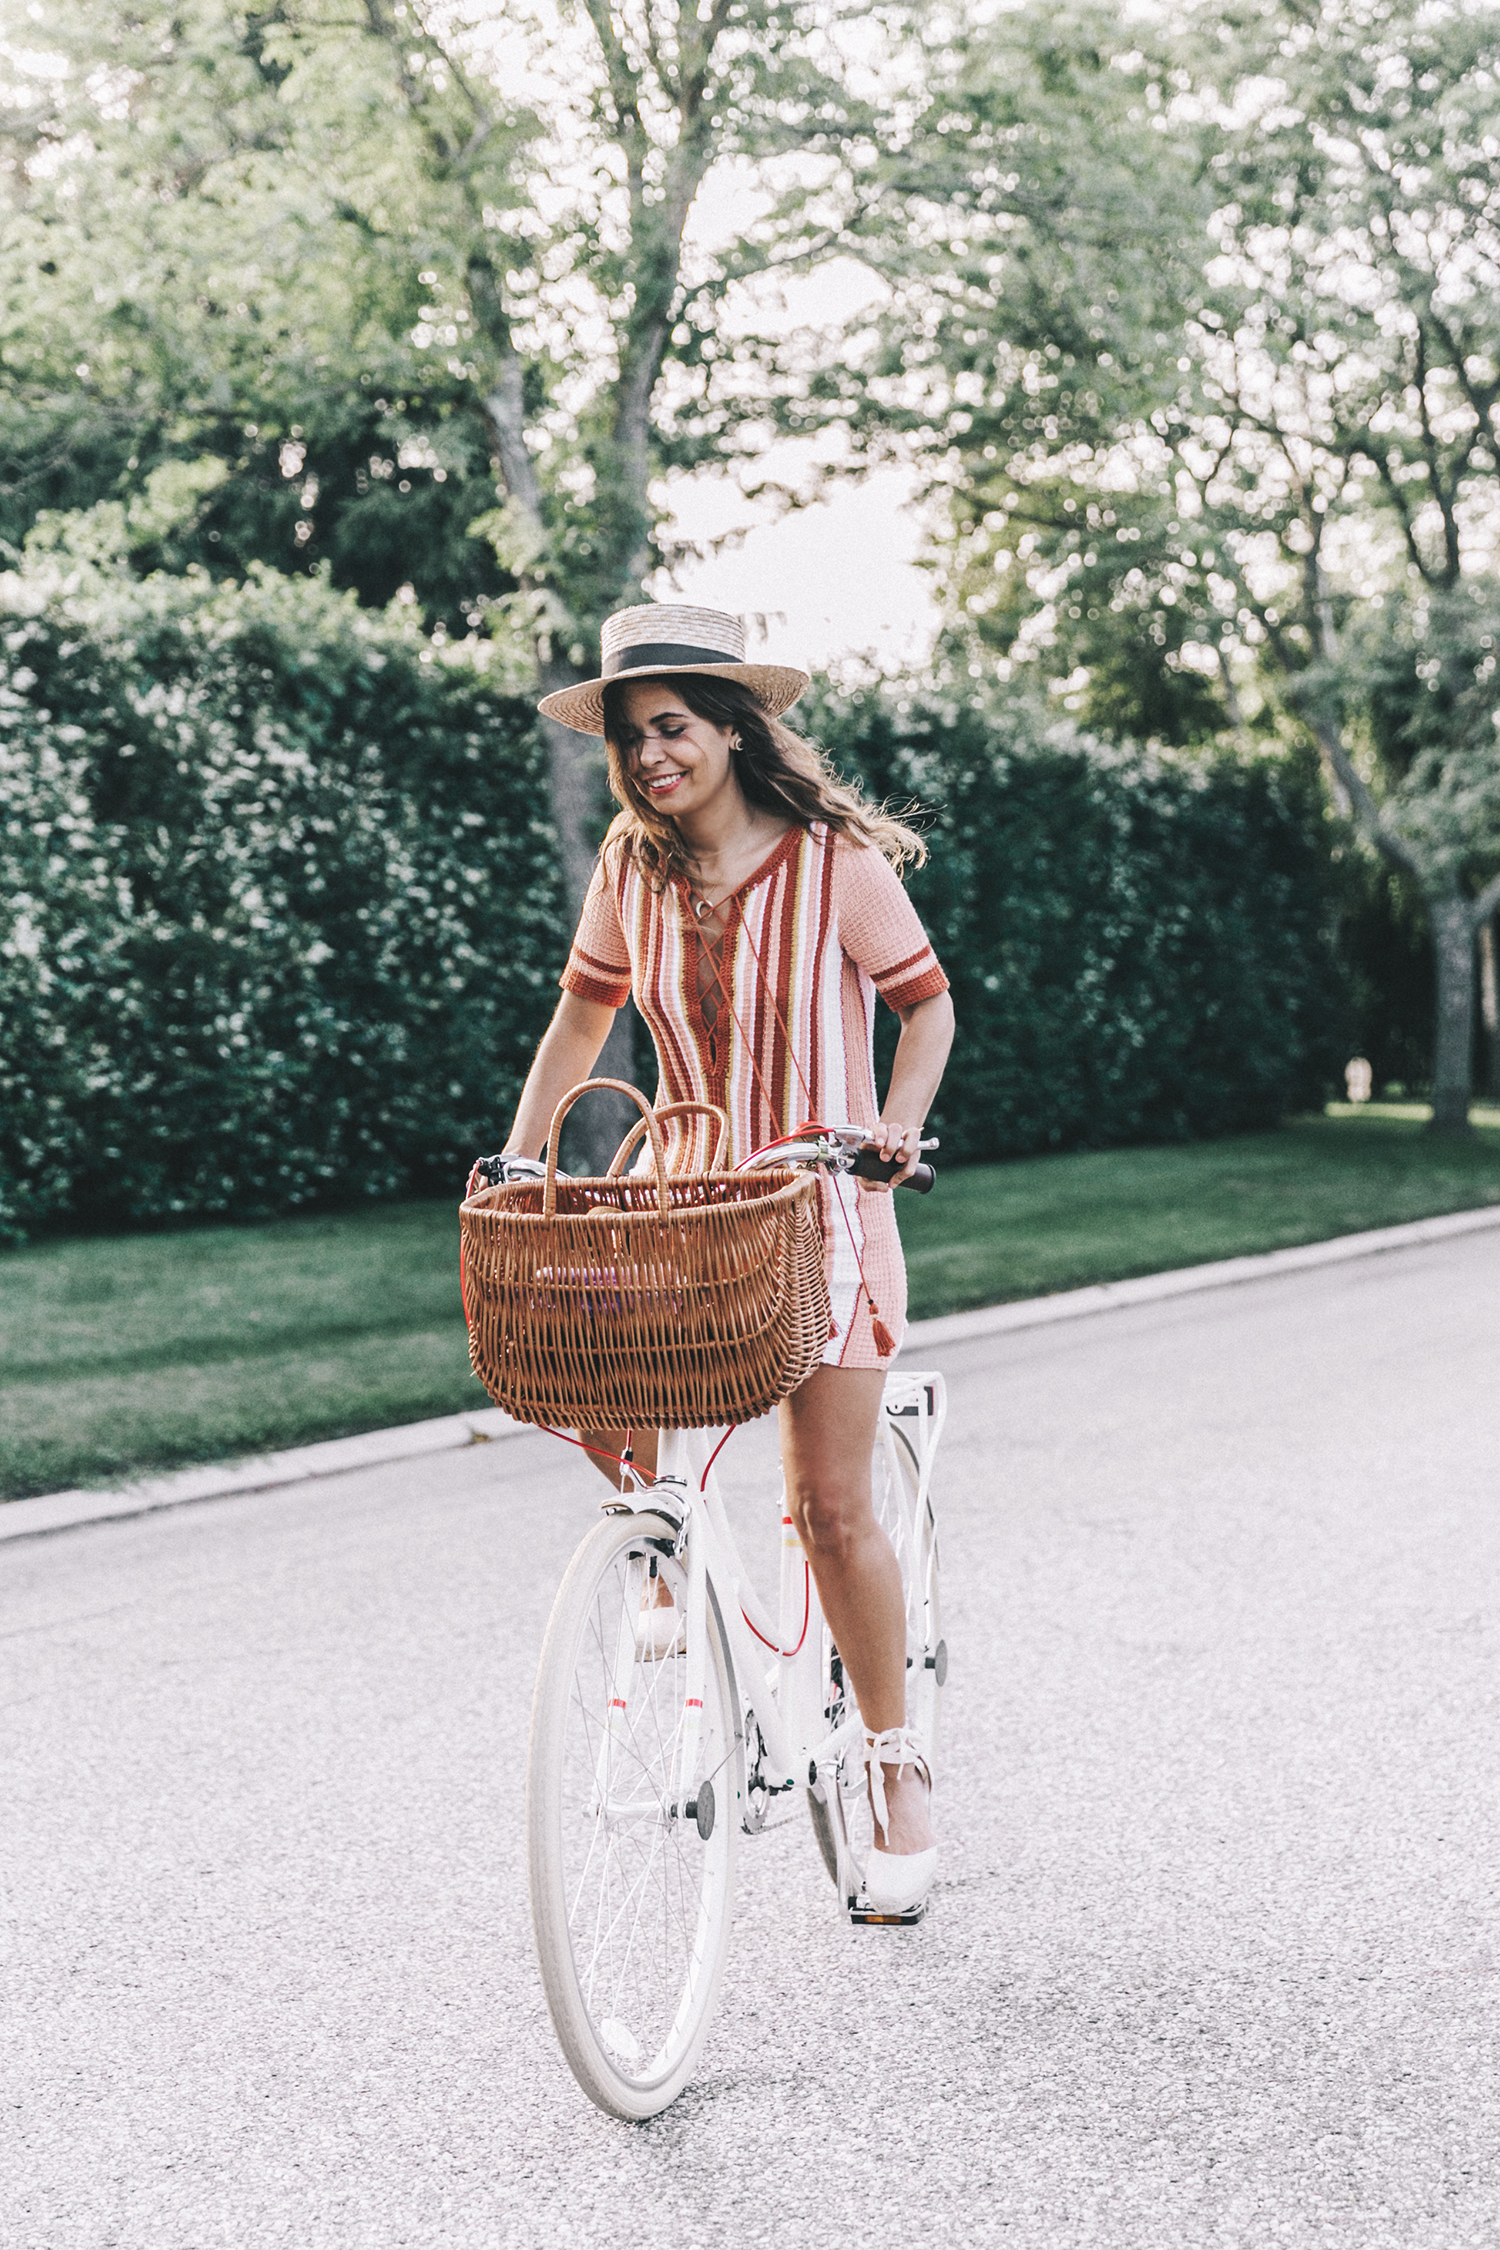 Revolve_in_The_Hamptons-Revolve_Clothing-Collage_Vintage-Free_People_Lace_Dress-Knitted_Dress-Soludos_Espadrilles-Canotier-Hat-Outfit-74